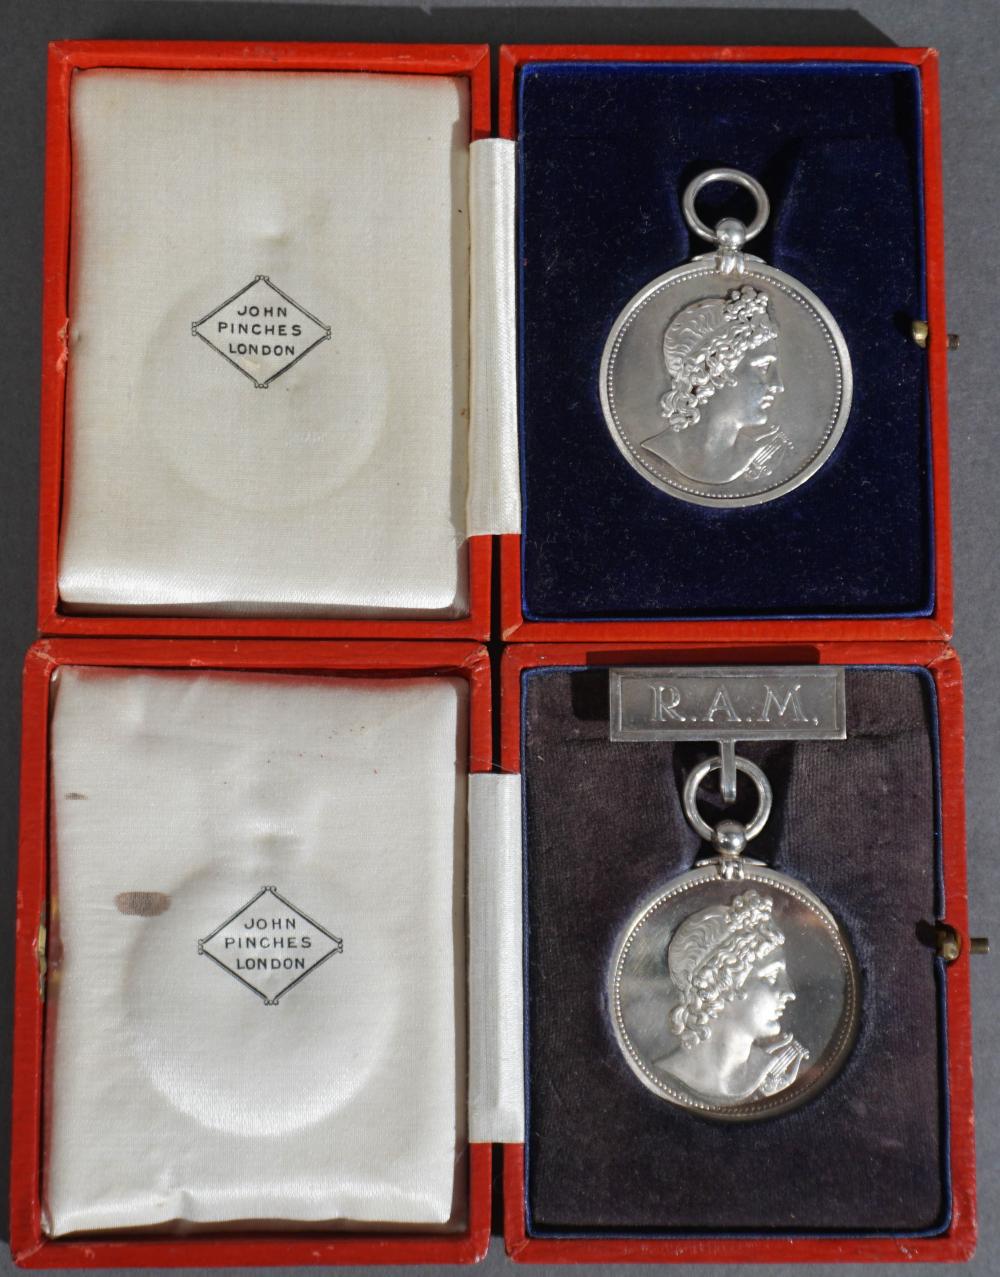 TWO ENGLISH STERLING SILVER ROYAL